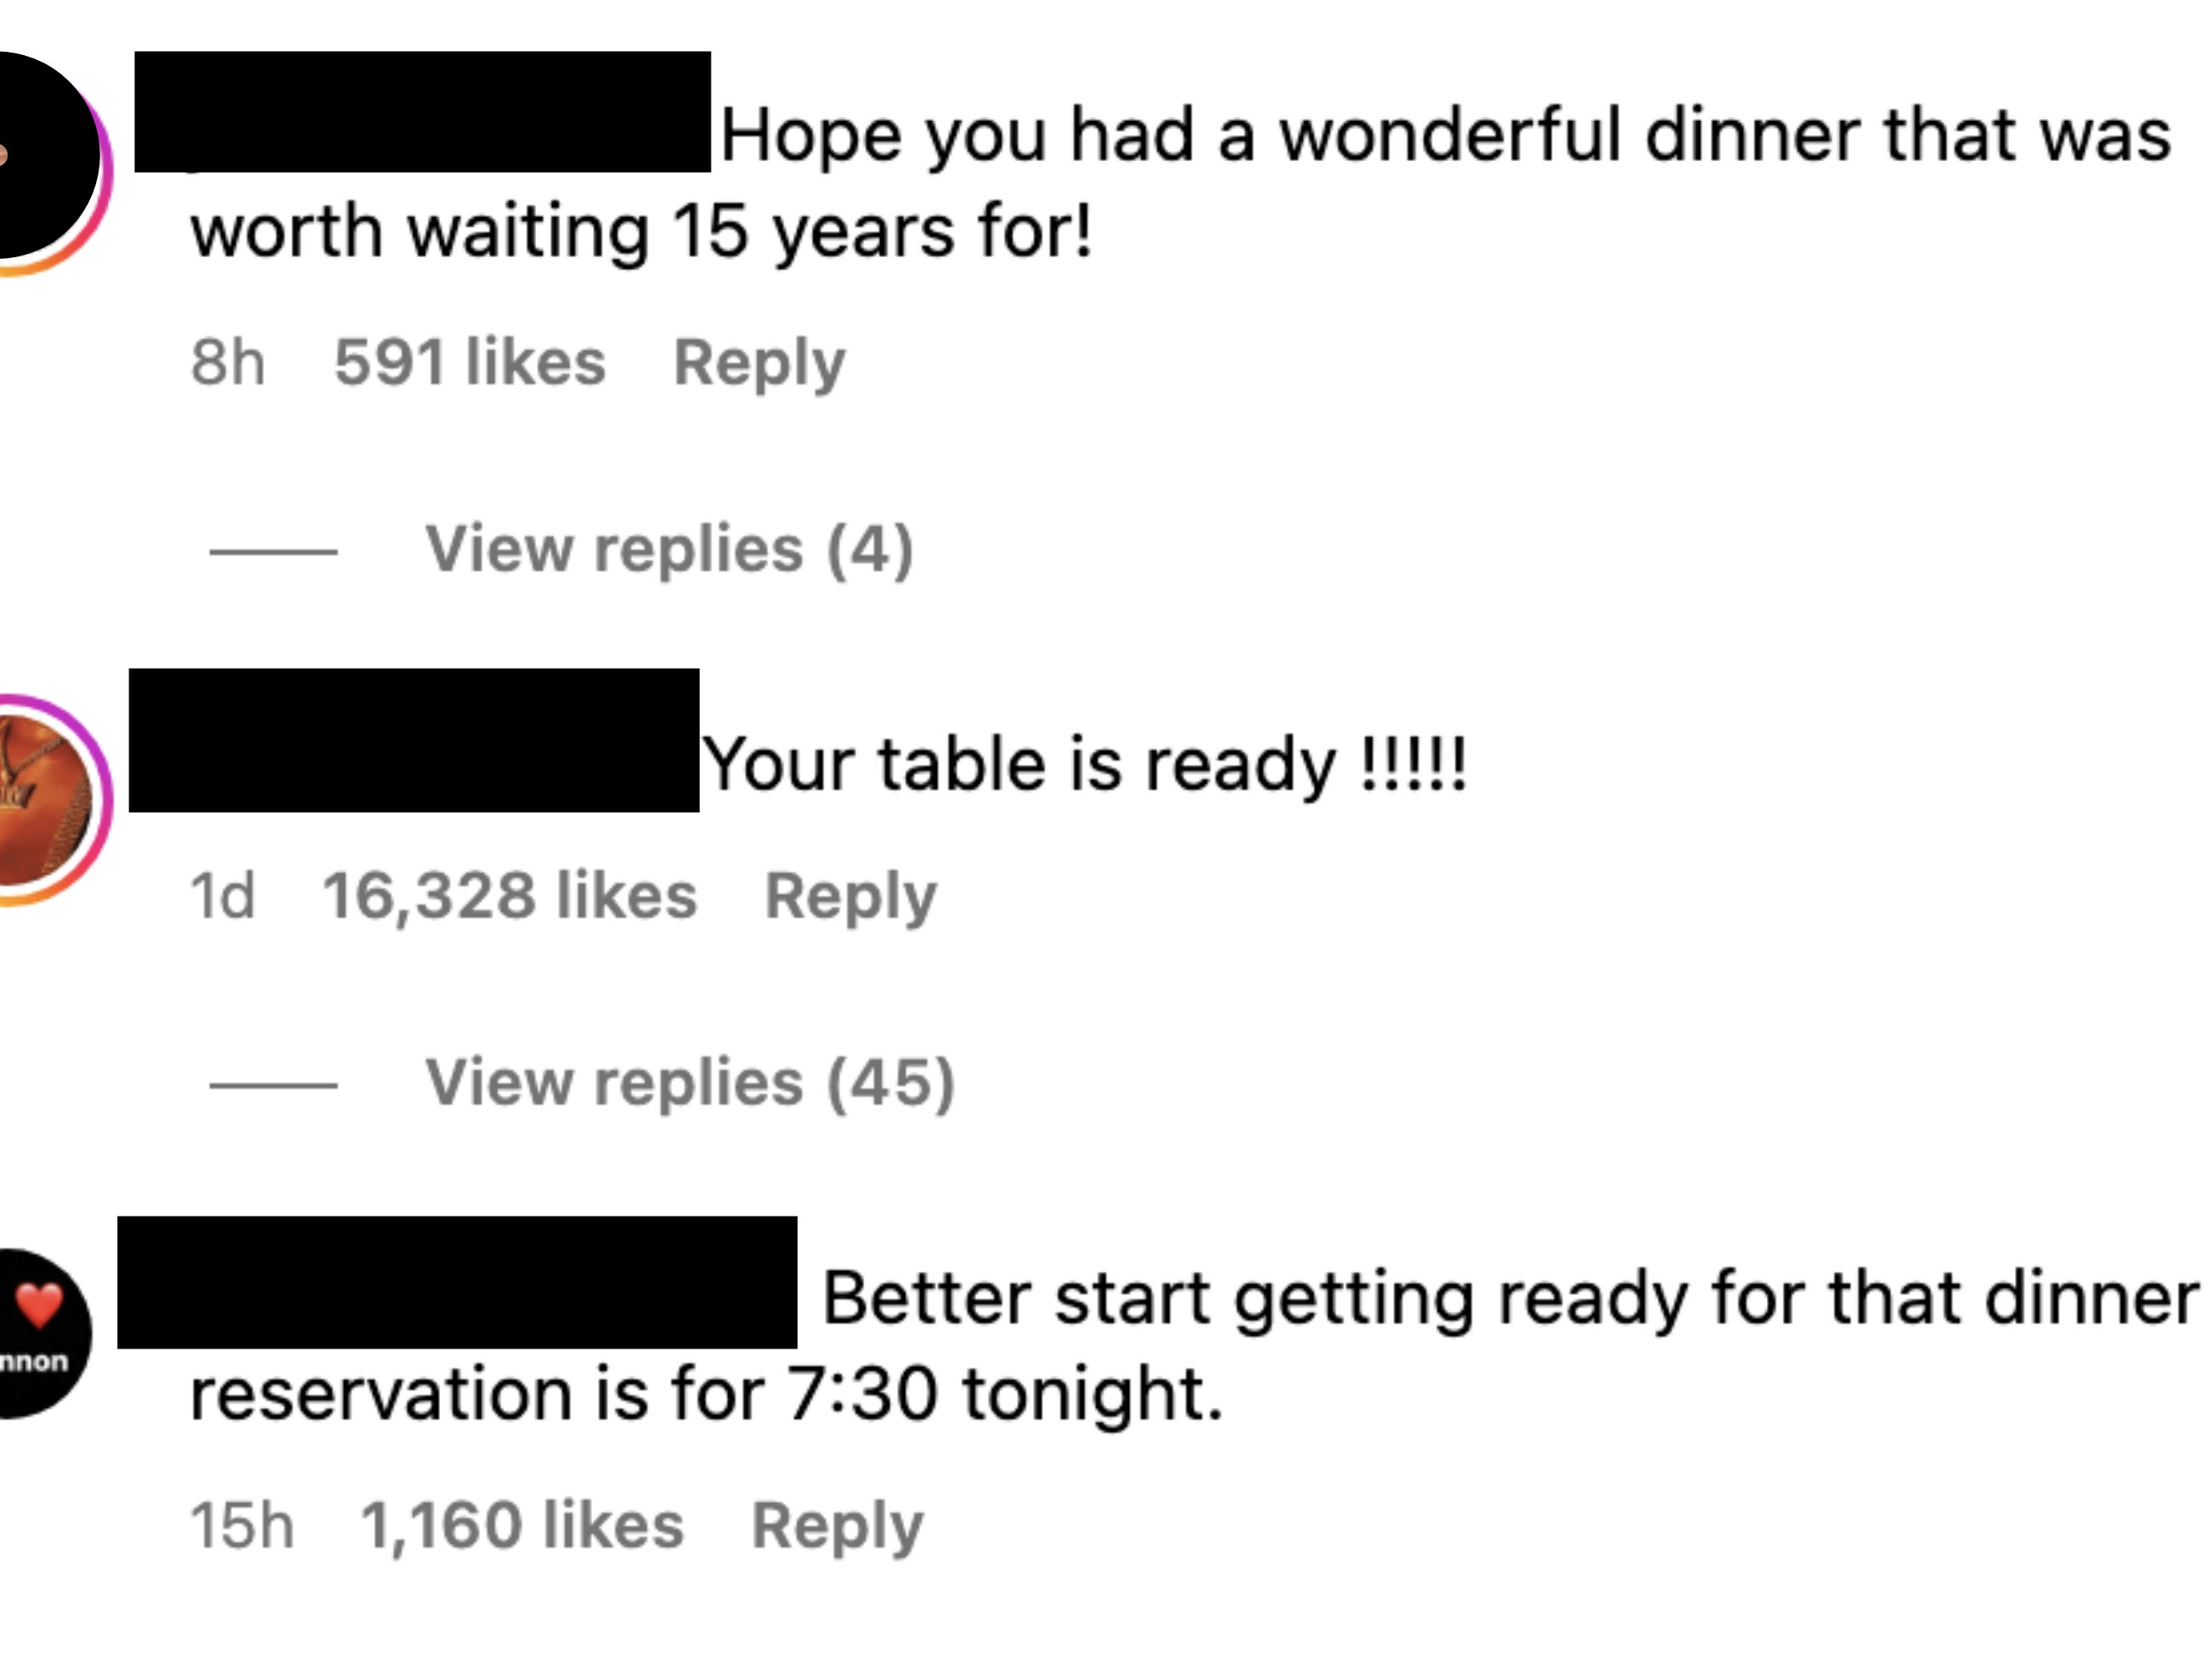 Comments: &quot;Hope you had a wonderful dinner that was worth waiting 15 years for!,&quot; &quot;Your table is ready!!!!!&quot; and &quot;Better start getting ready for that dinner reservation is for 7:30 tonight&quot;